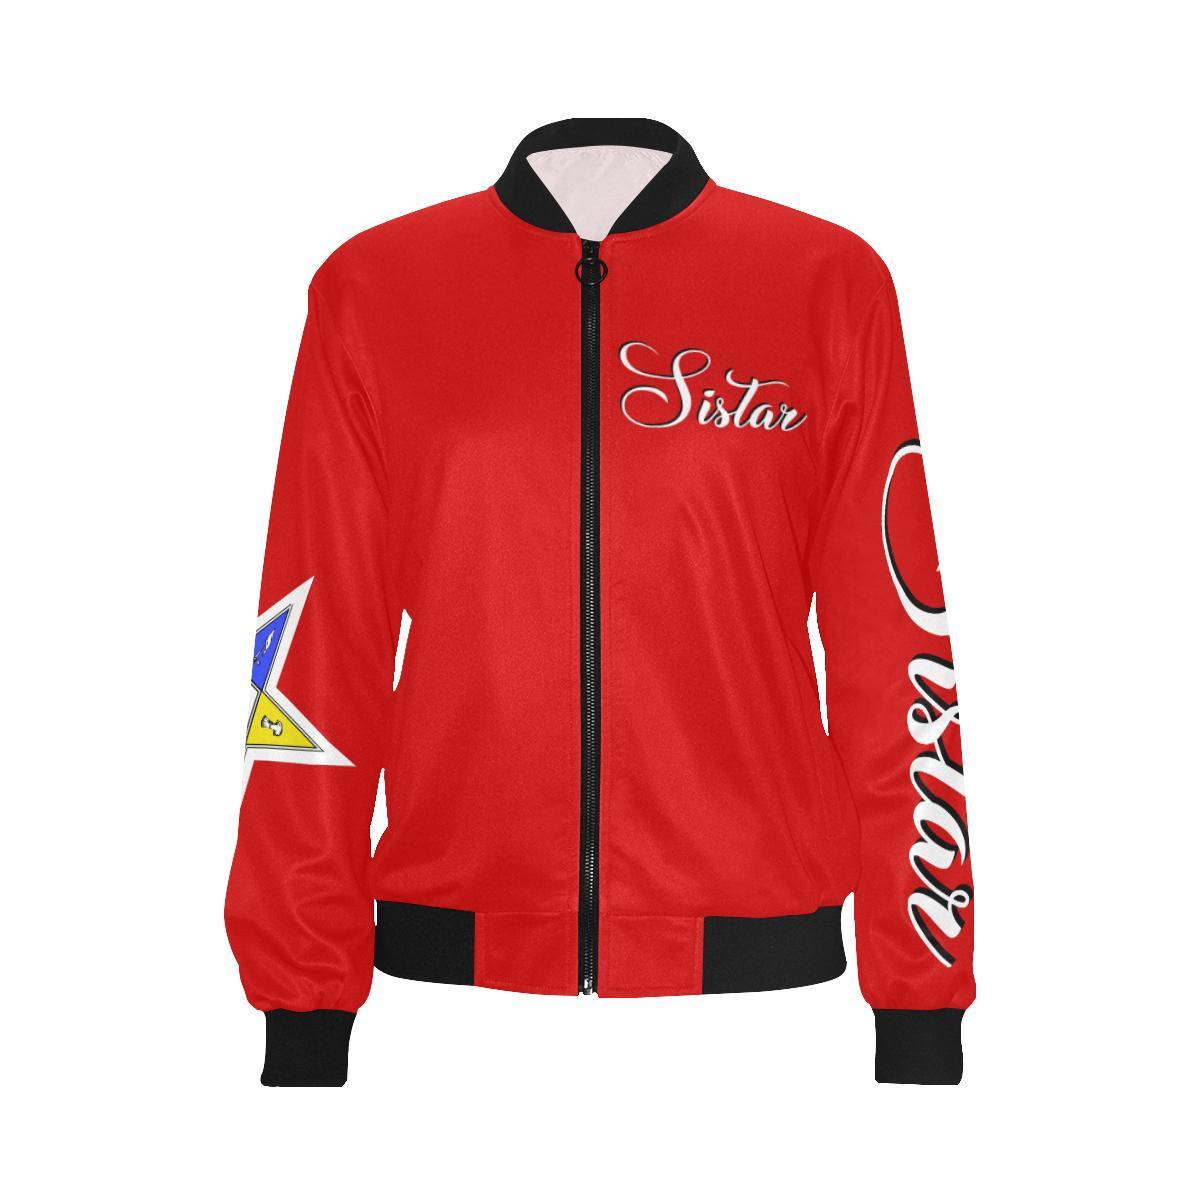 Eastern Star Sistar Red Bomber Jacket - Strong Girl Tees